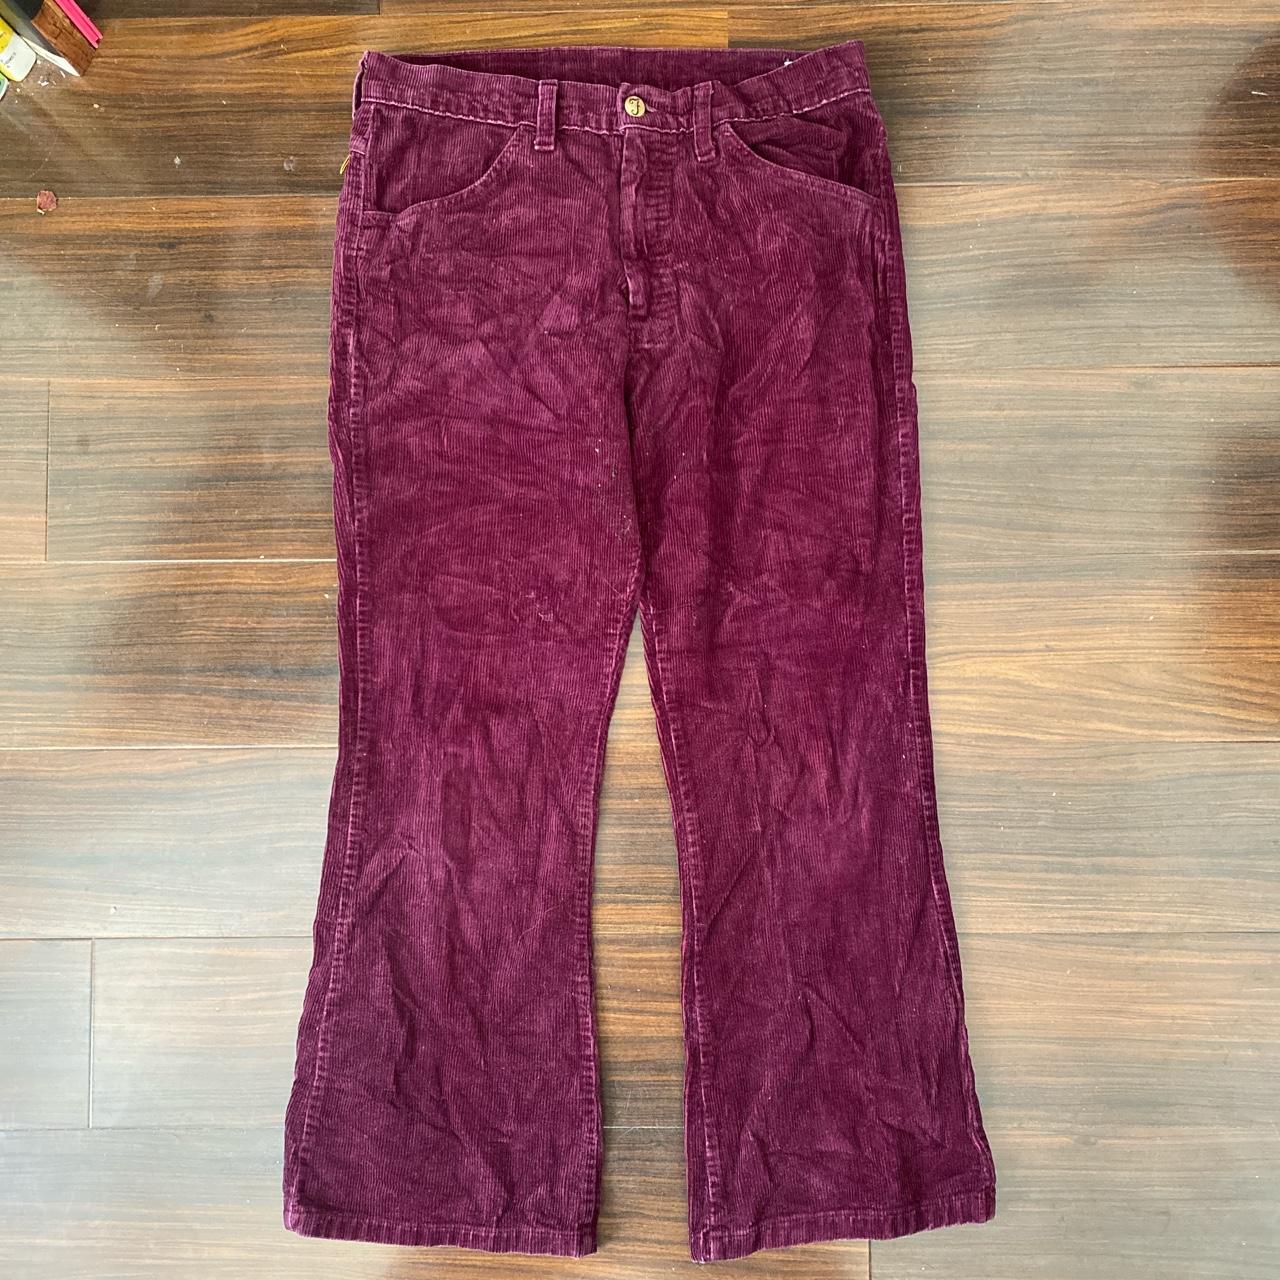 Farah Women's Burgundy and Gold Trousers